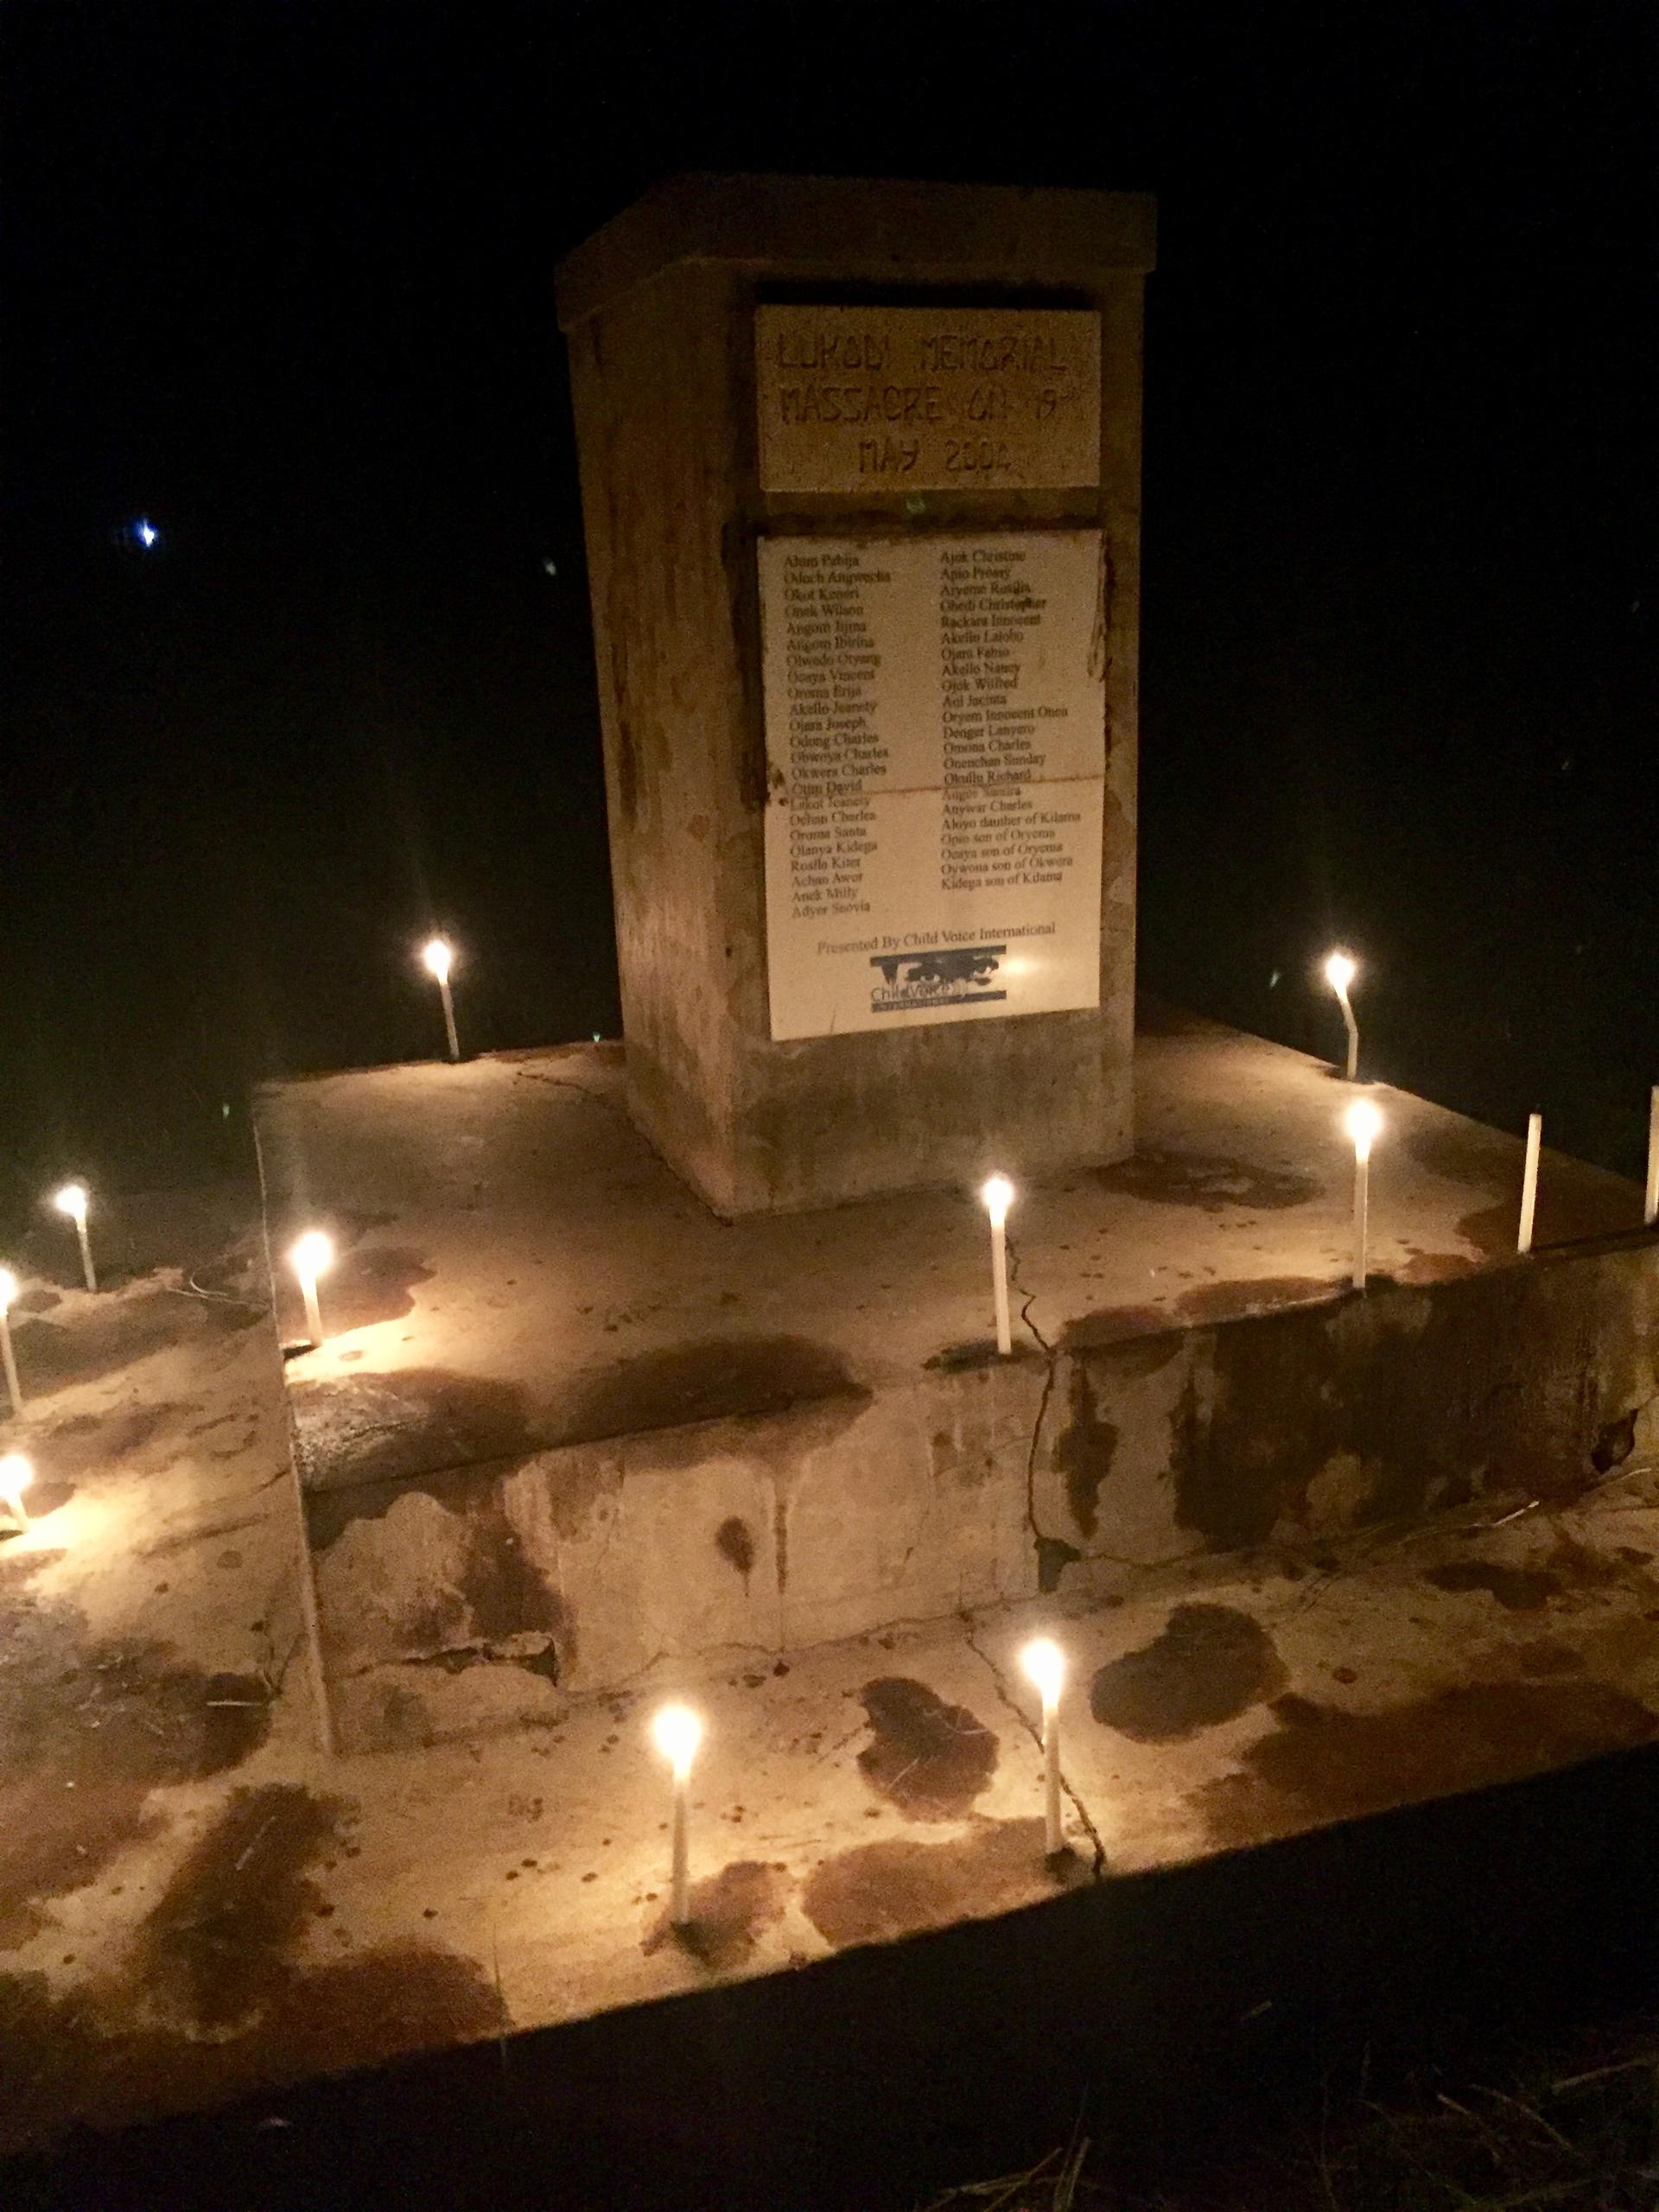 A memorial with candles on it to honor those killed by the Lord's Resistance Army in Lukodi, Uganda.